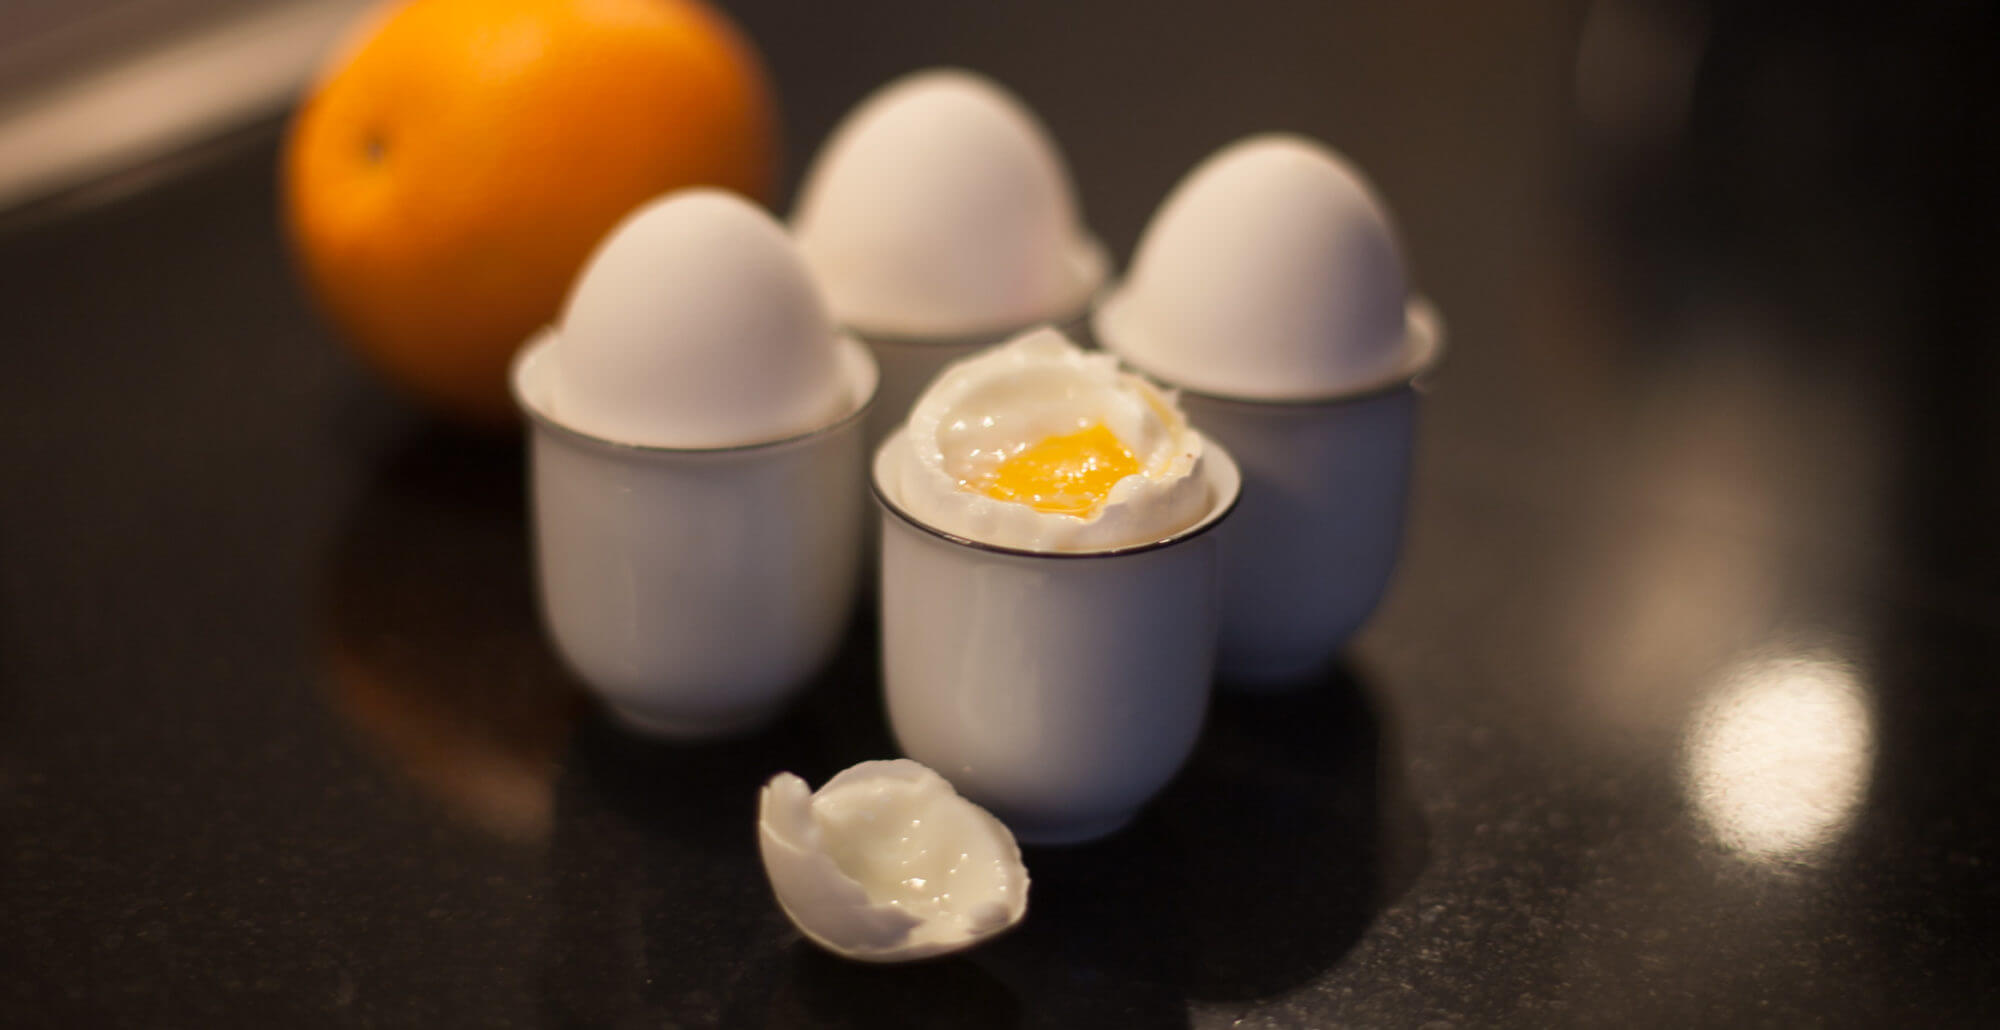 10 Minute Sous Vide Soft Boiled Eggs - A Duck's Oven